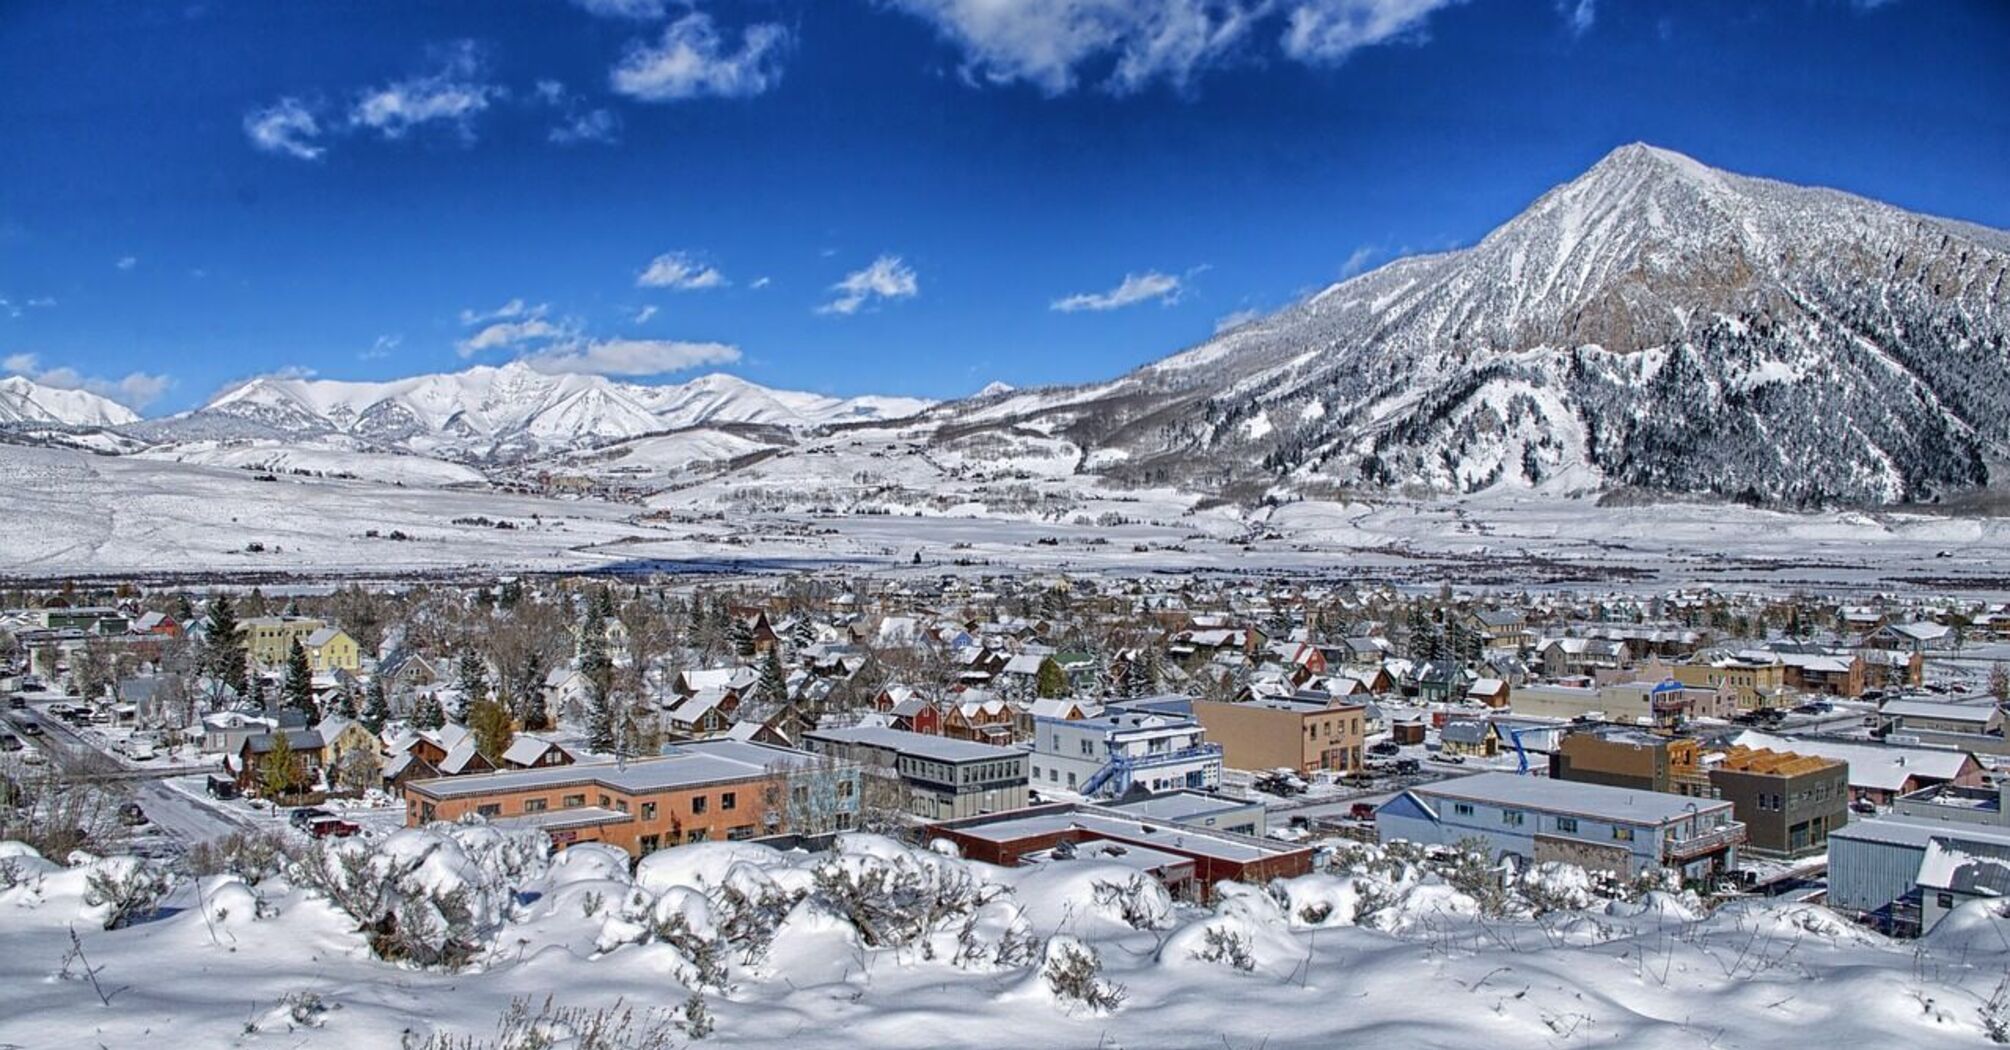 Best ski resorts in Colorado, USA: Top 8 mountain hideaways with quality snow, colourful après-ski and great terrain